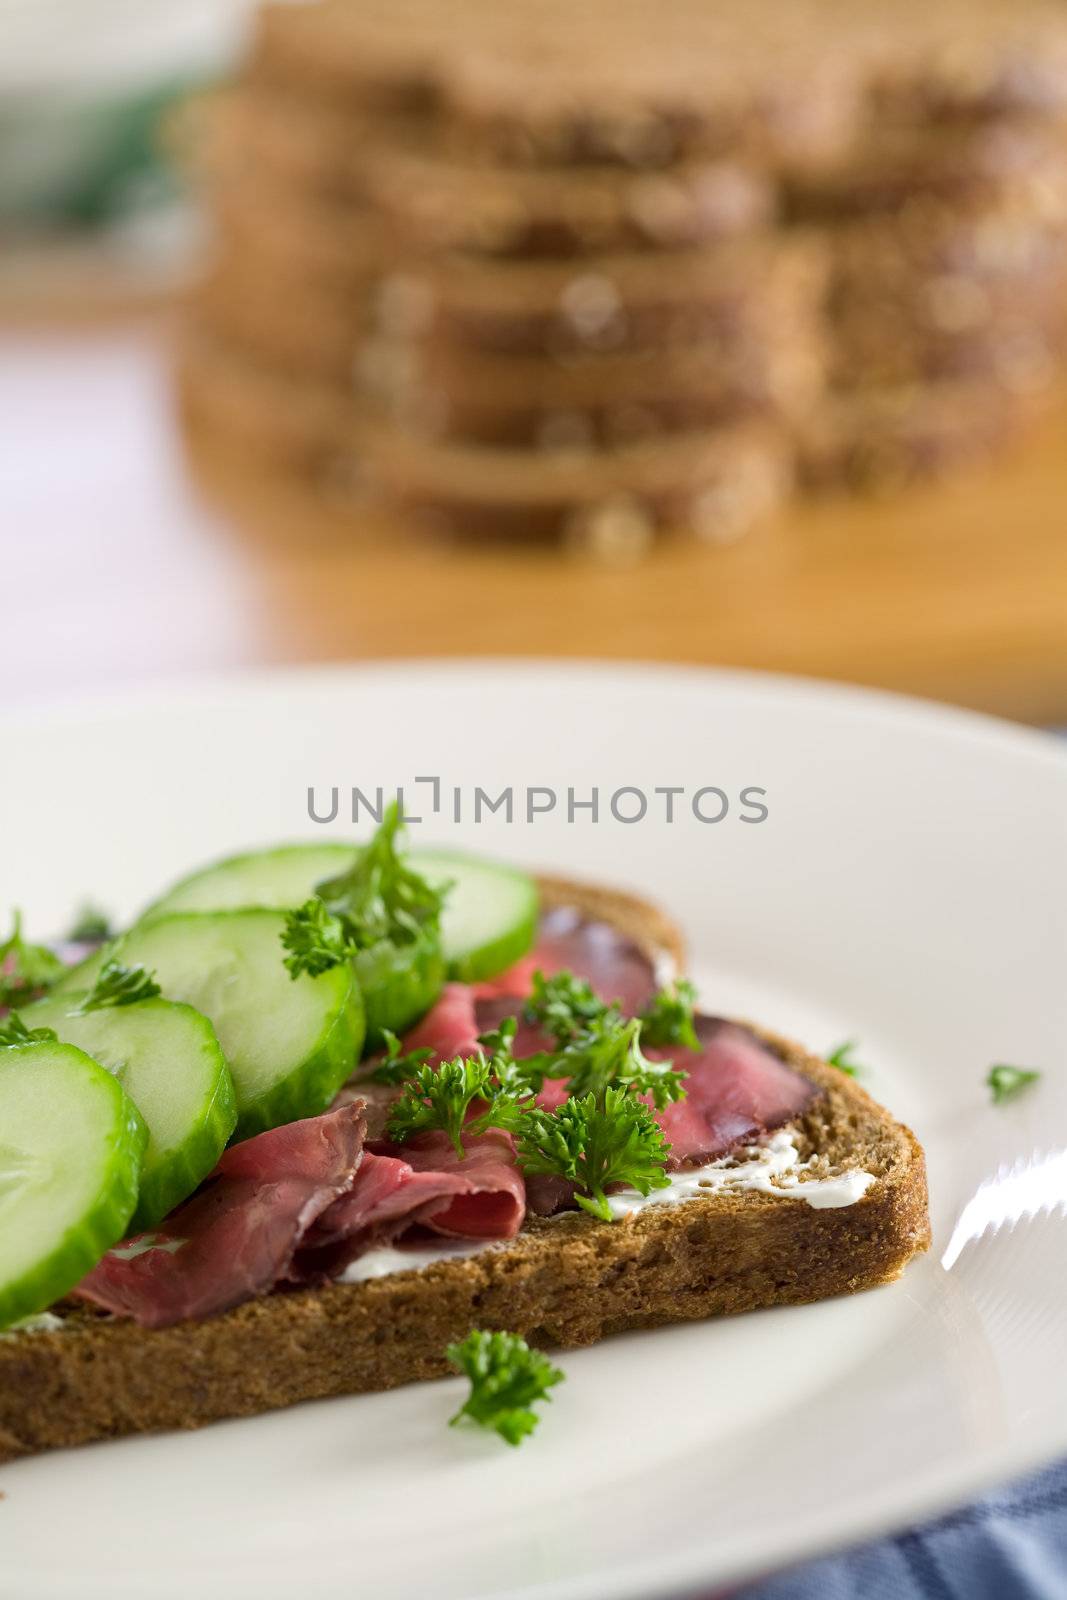 Delicious healthy sandwich with roastbeef and cucumber